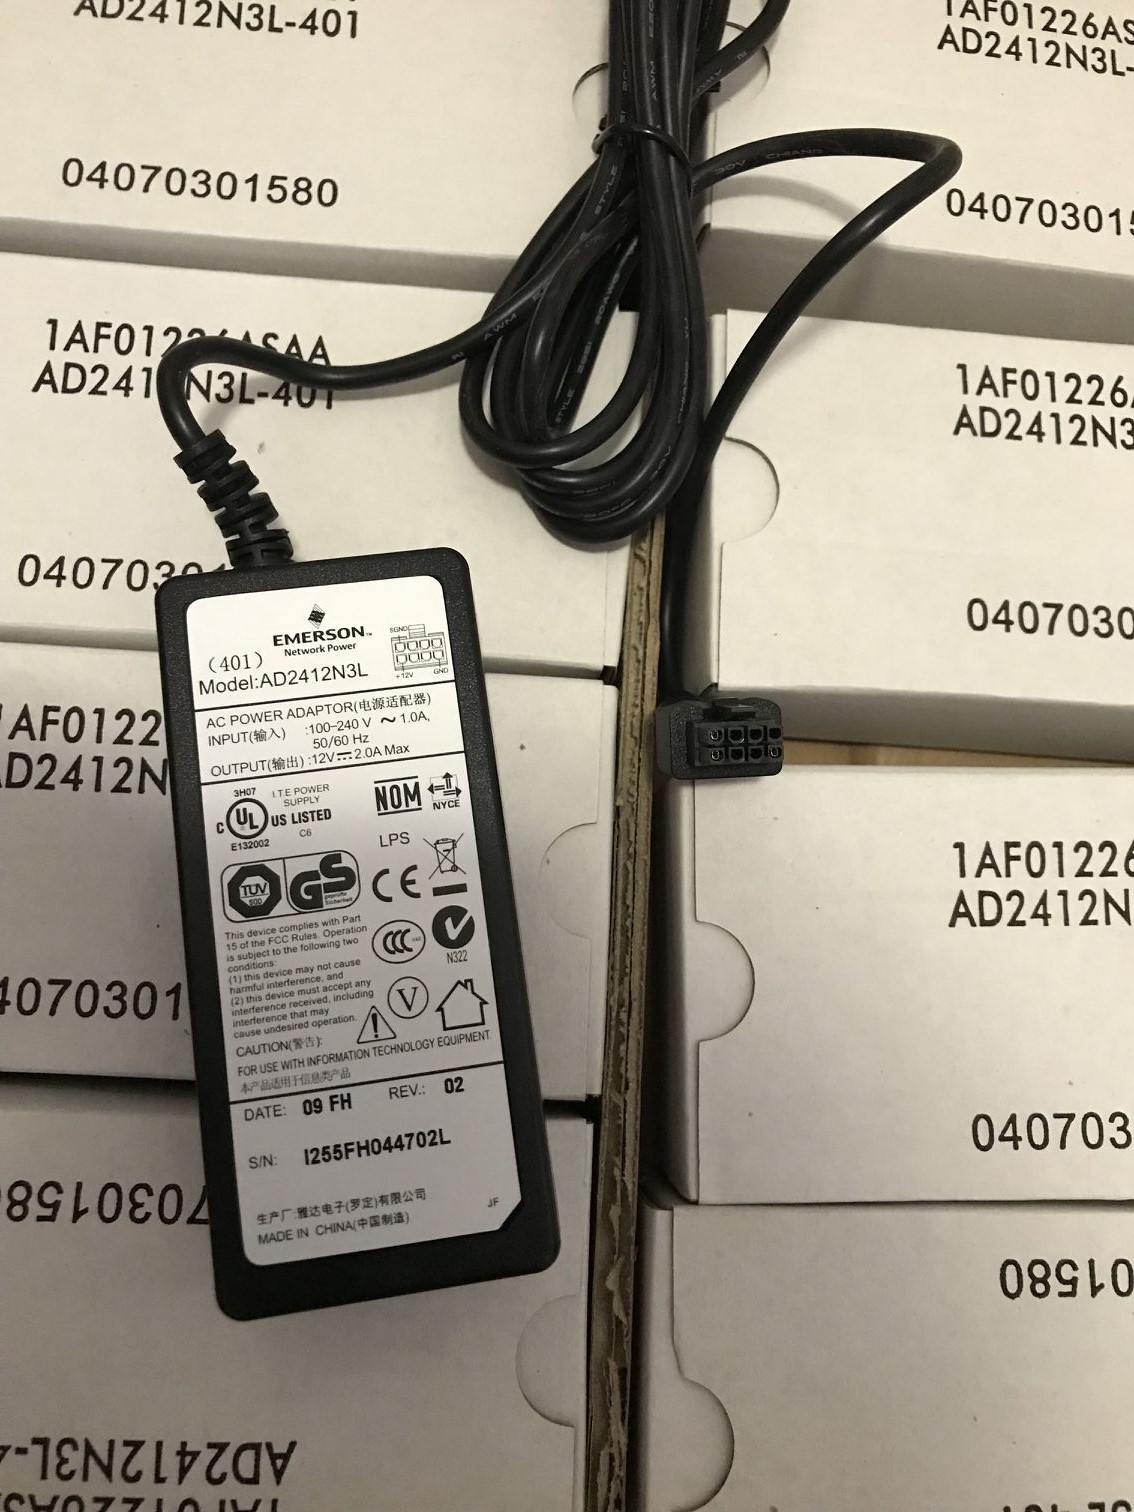 *NEW*EMERSON AD2412N3L 12V 2.0A AC DC Adapter POWER SUPPLY